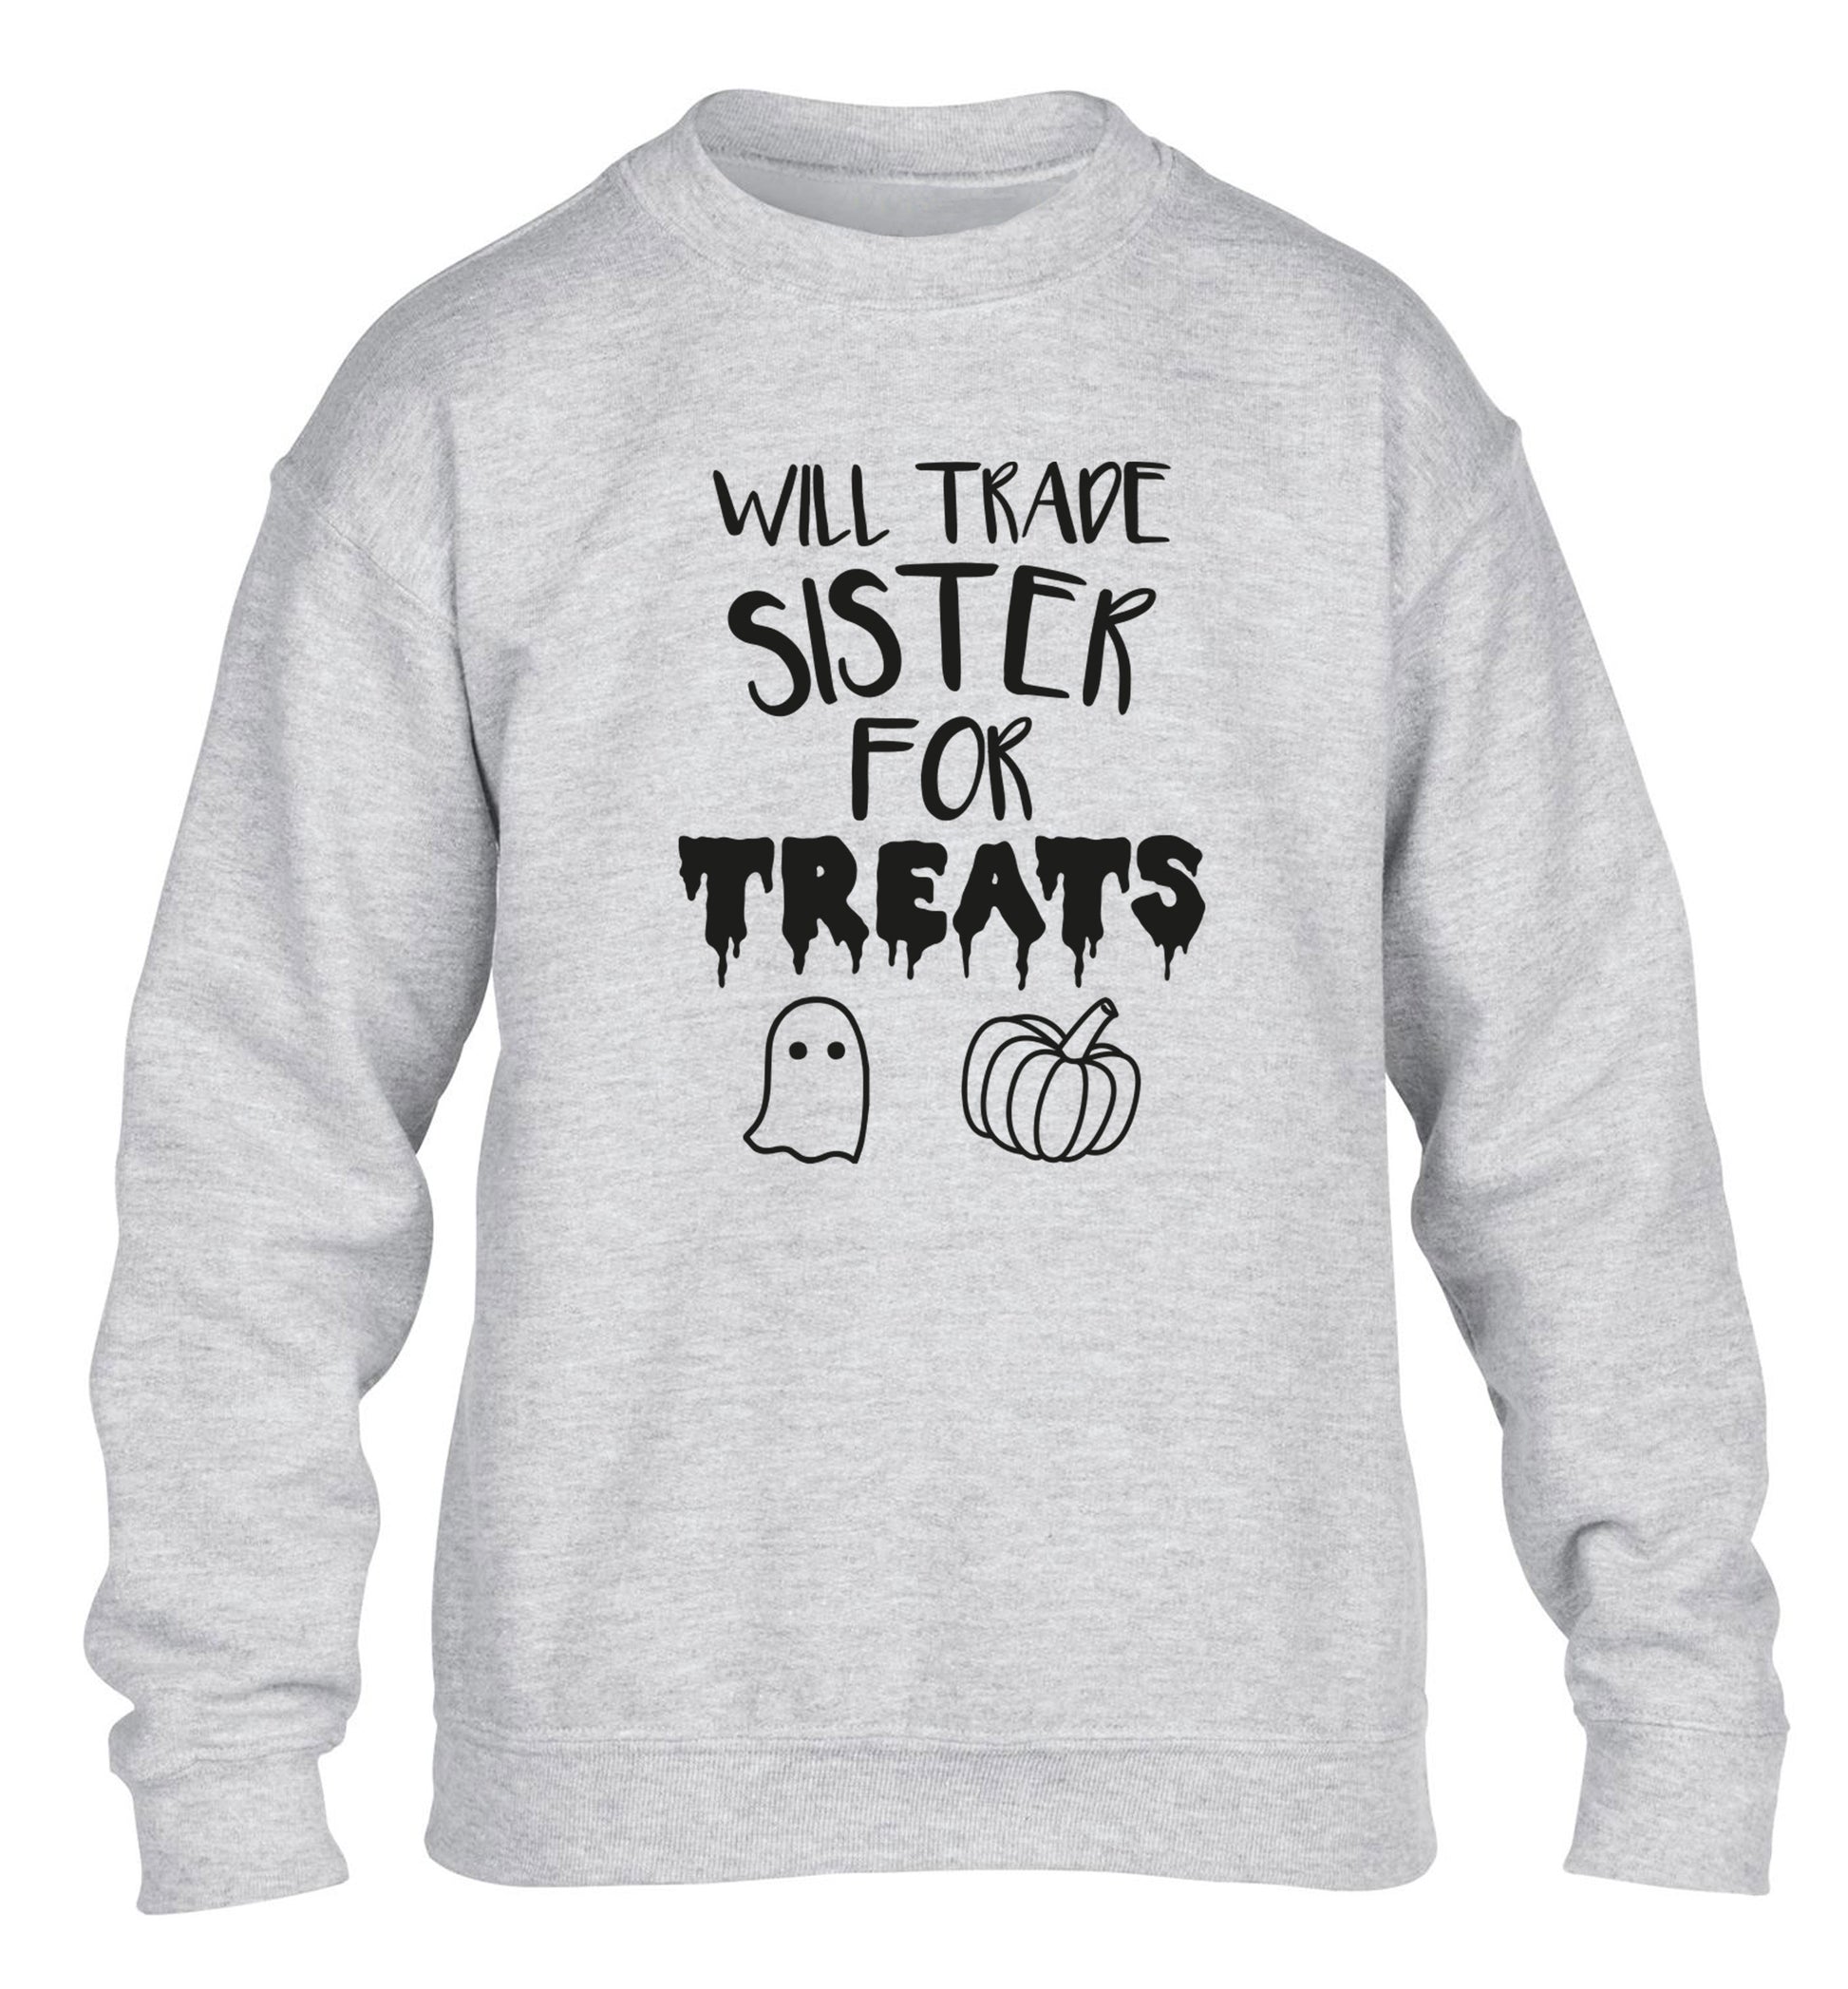 Will trade sister for treats children's grey sweater 12-14 Years